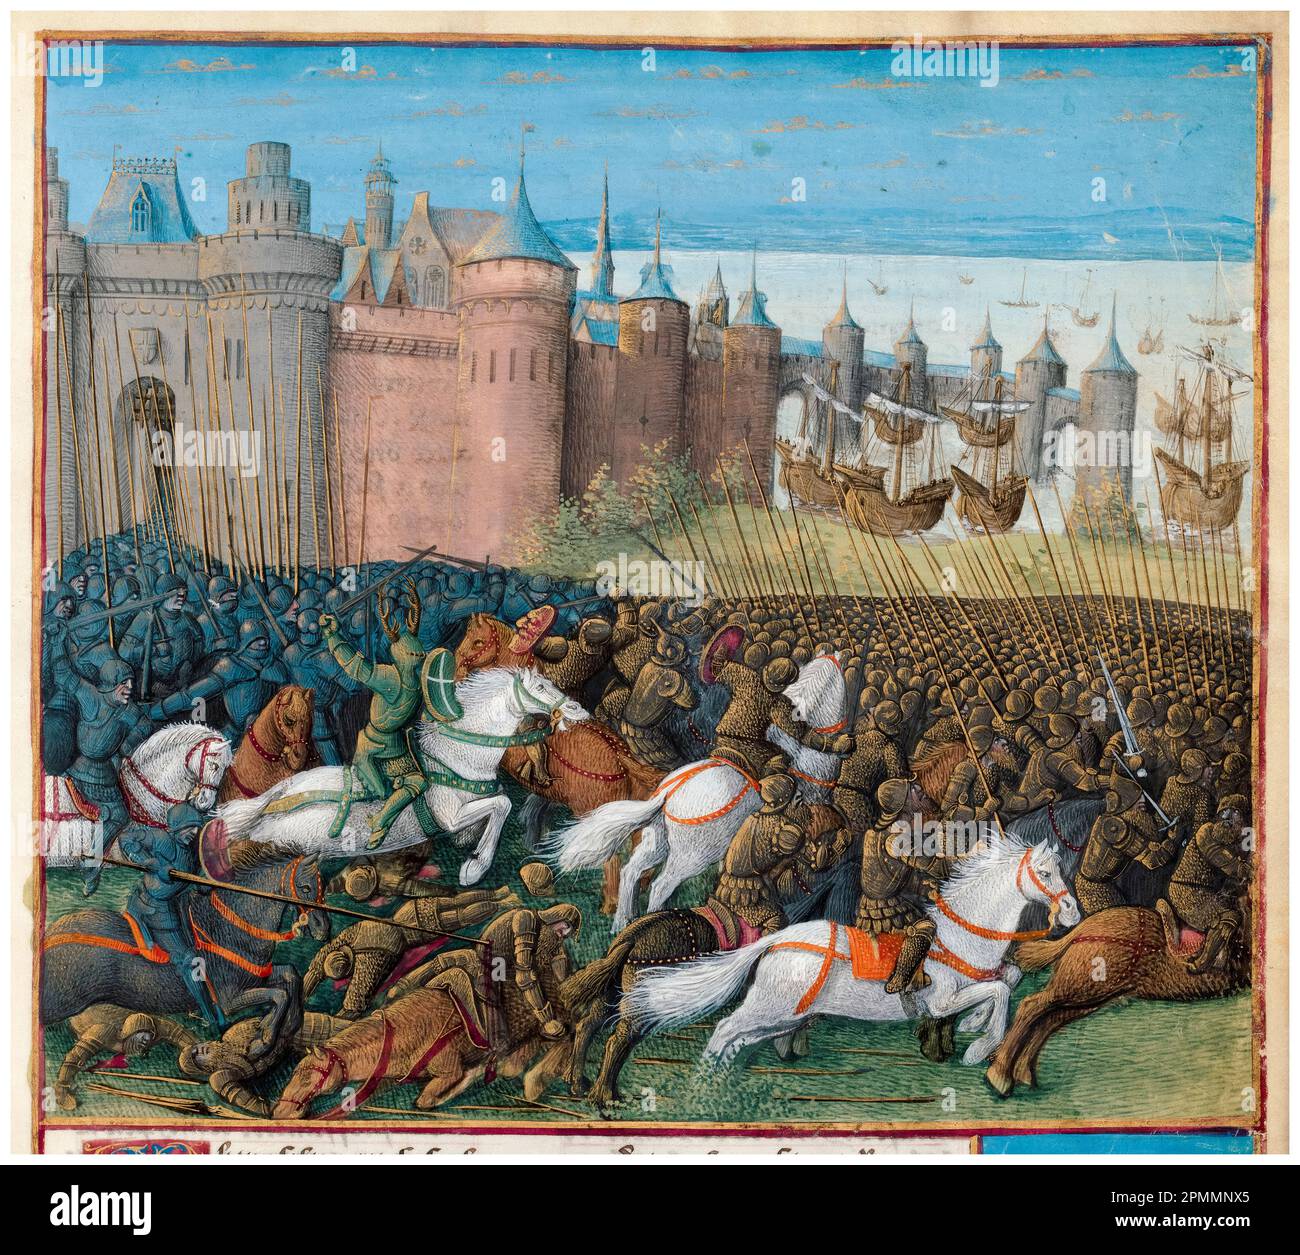 Crusades: The Siege of Tyre (1187-1188), a battle during the Second Crusade, illuminated manuscript painting by Jean Colombe, circa 1474 Stock Photo